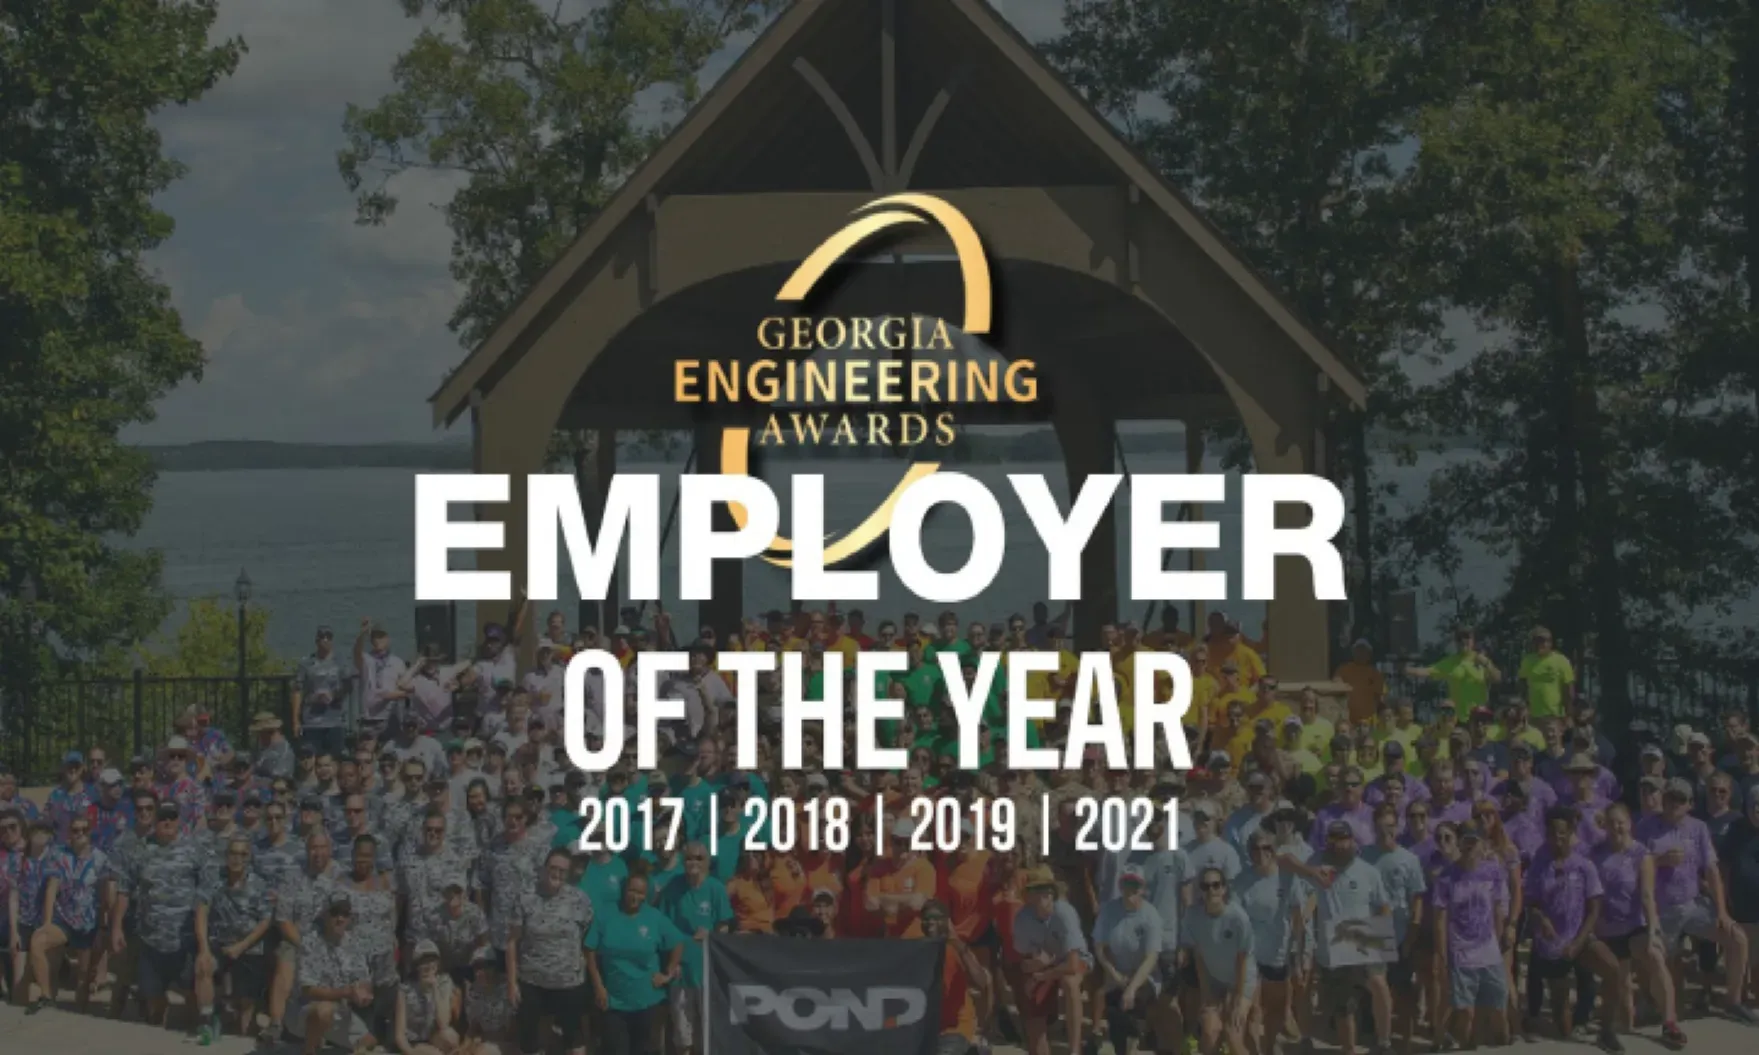 Employer of the Year awarded to Pond